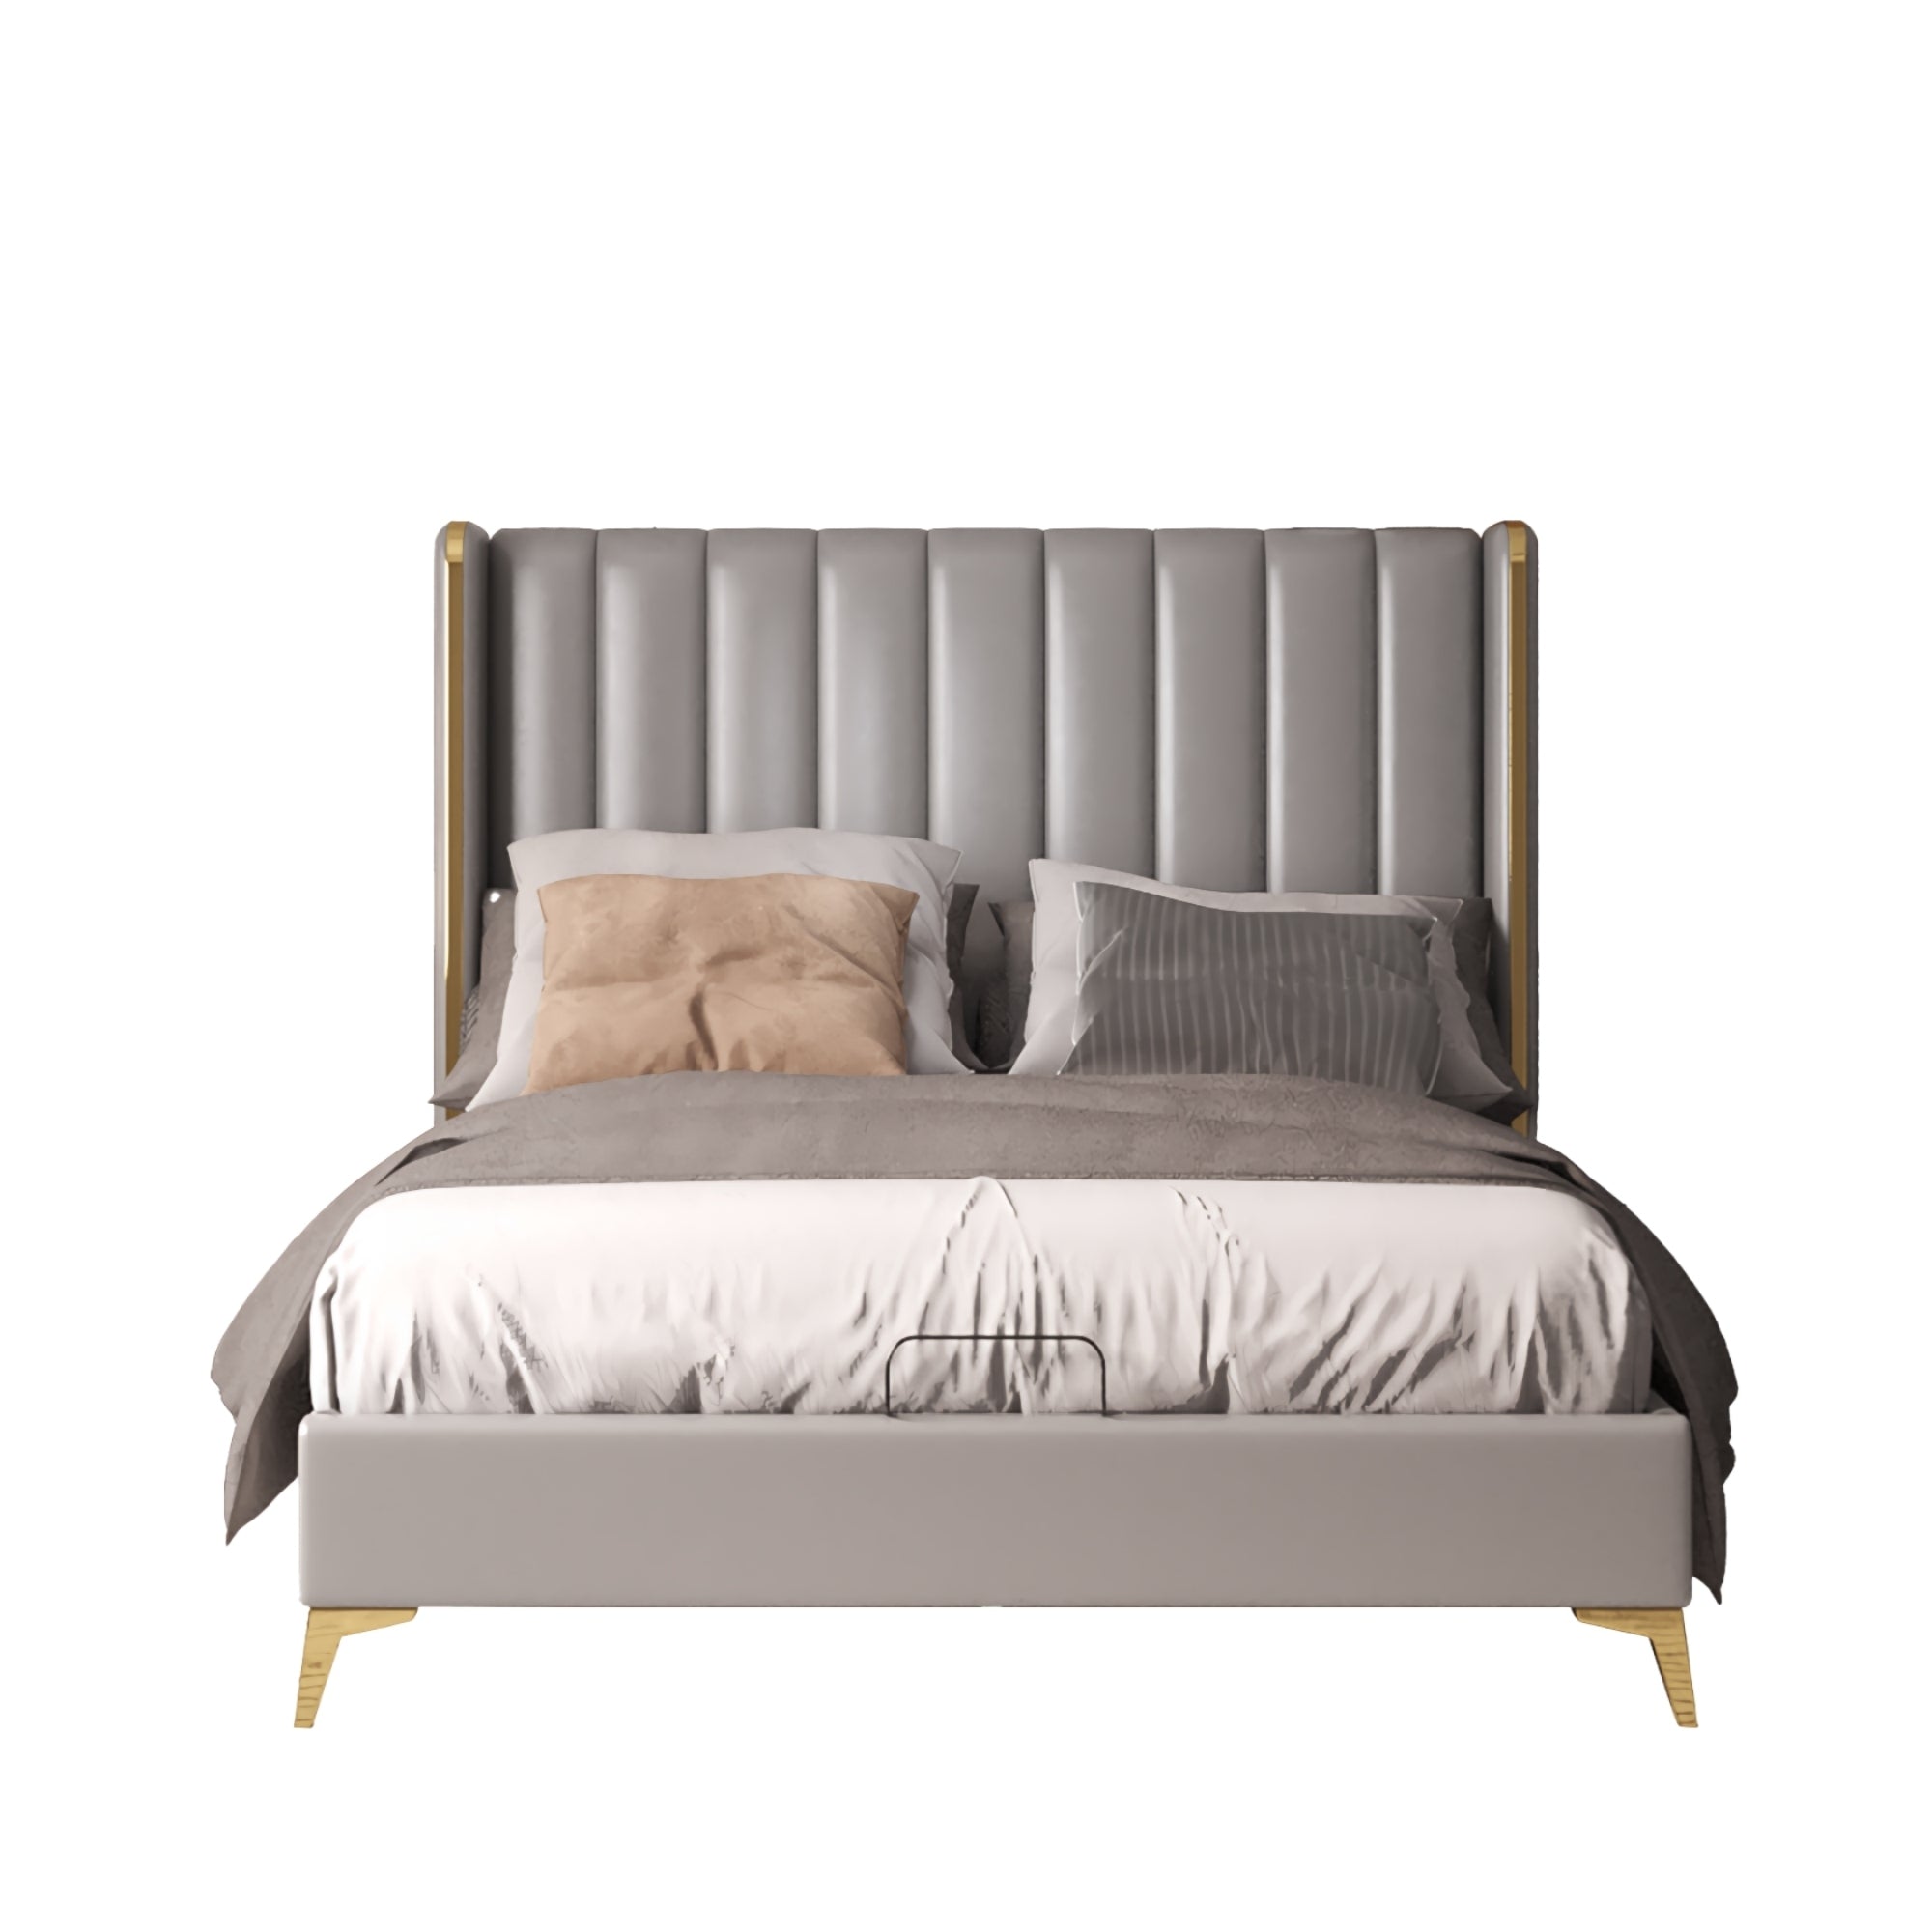 56" Tall Headboard Channel Tufted Upholstered Platform Bed with Thickening Pinewooden Slats and Metal Leg, Queen Size Bed Frame - Light Grey